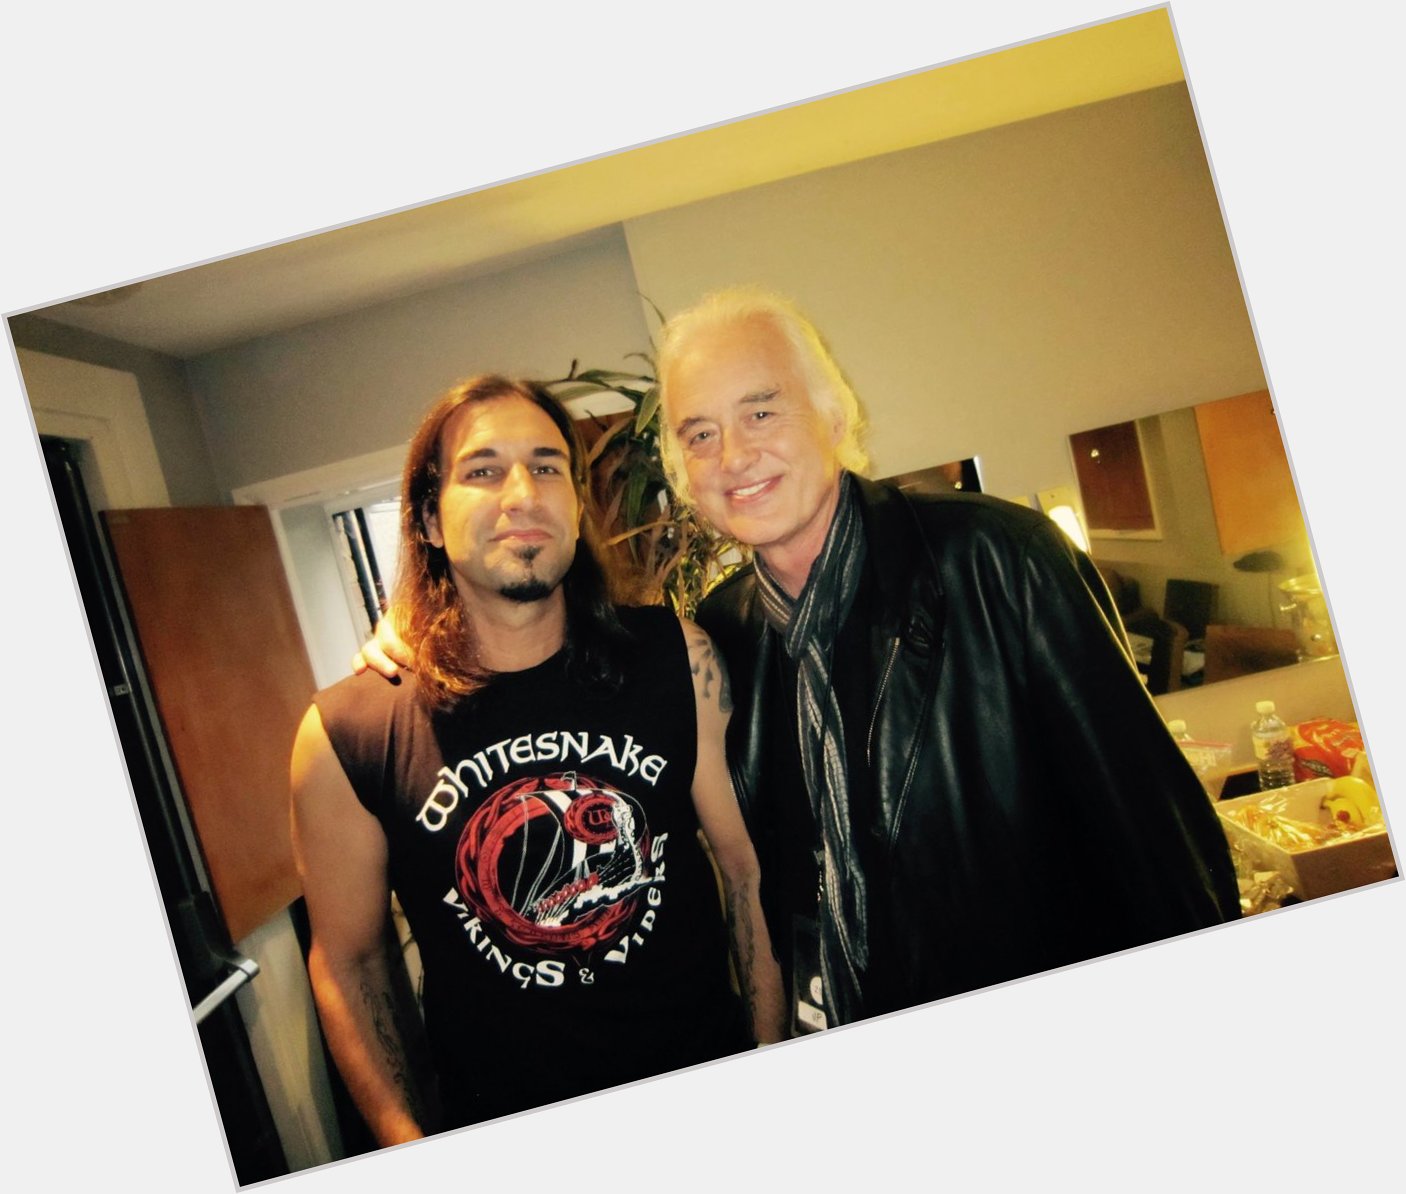 Happy bday to Jimmy Page; my fave musician and founder of the mightiest band ever!  